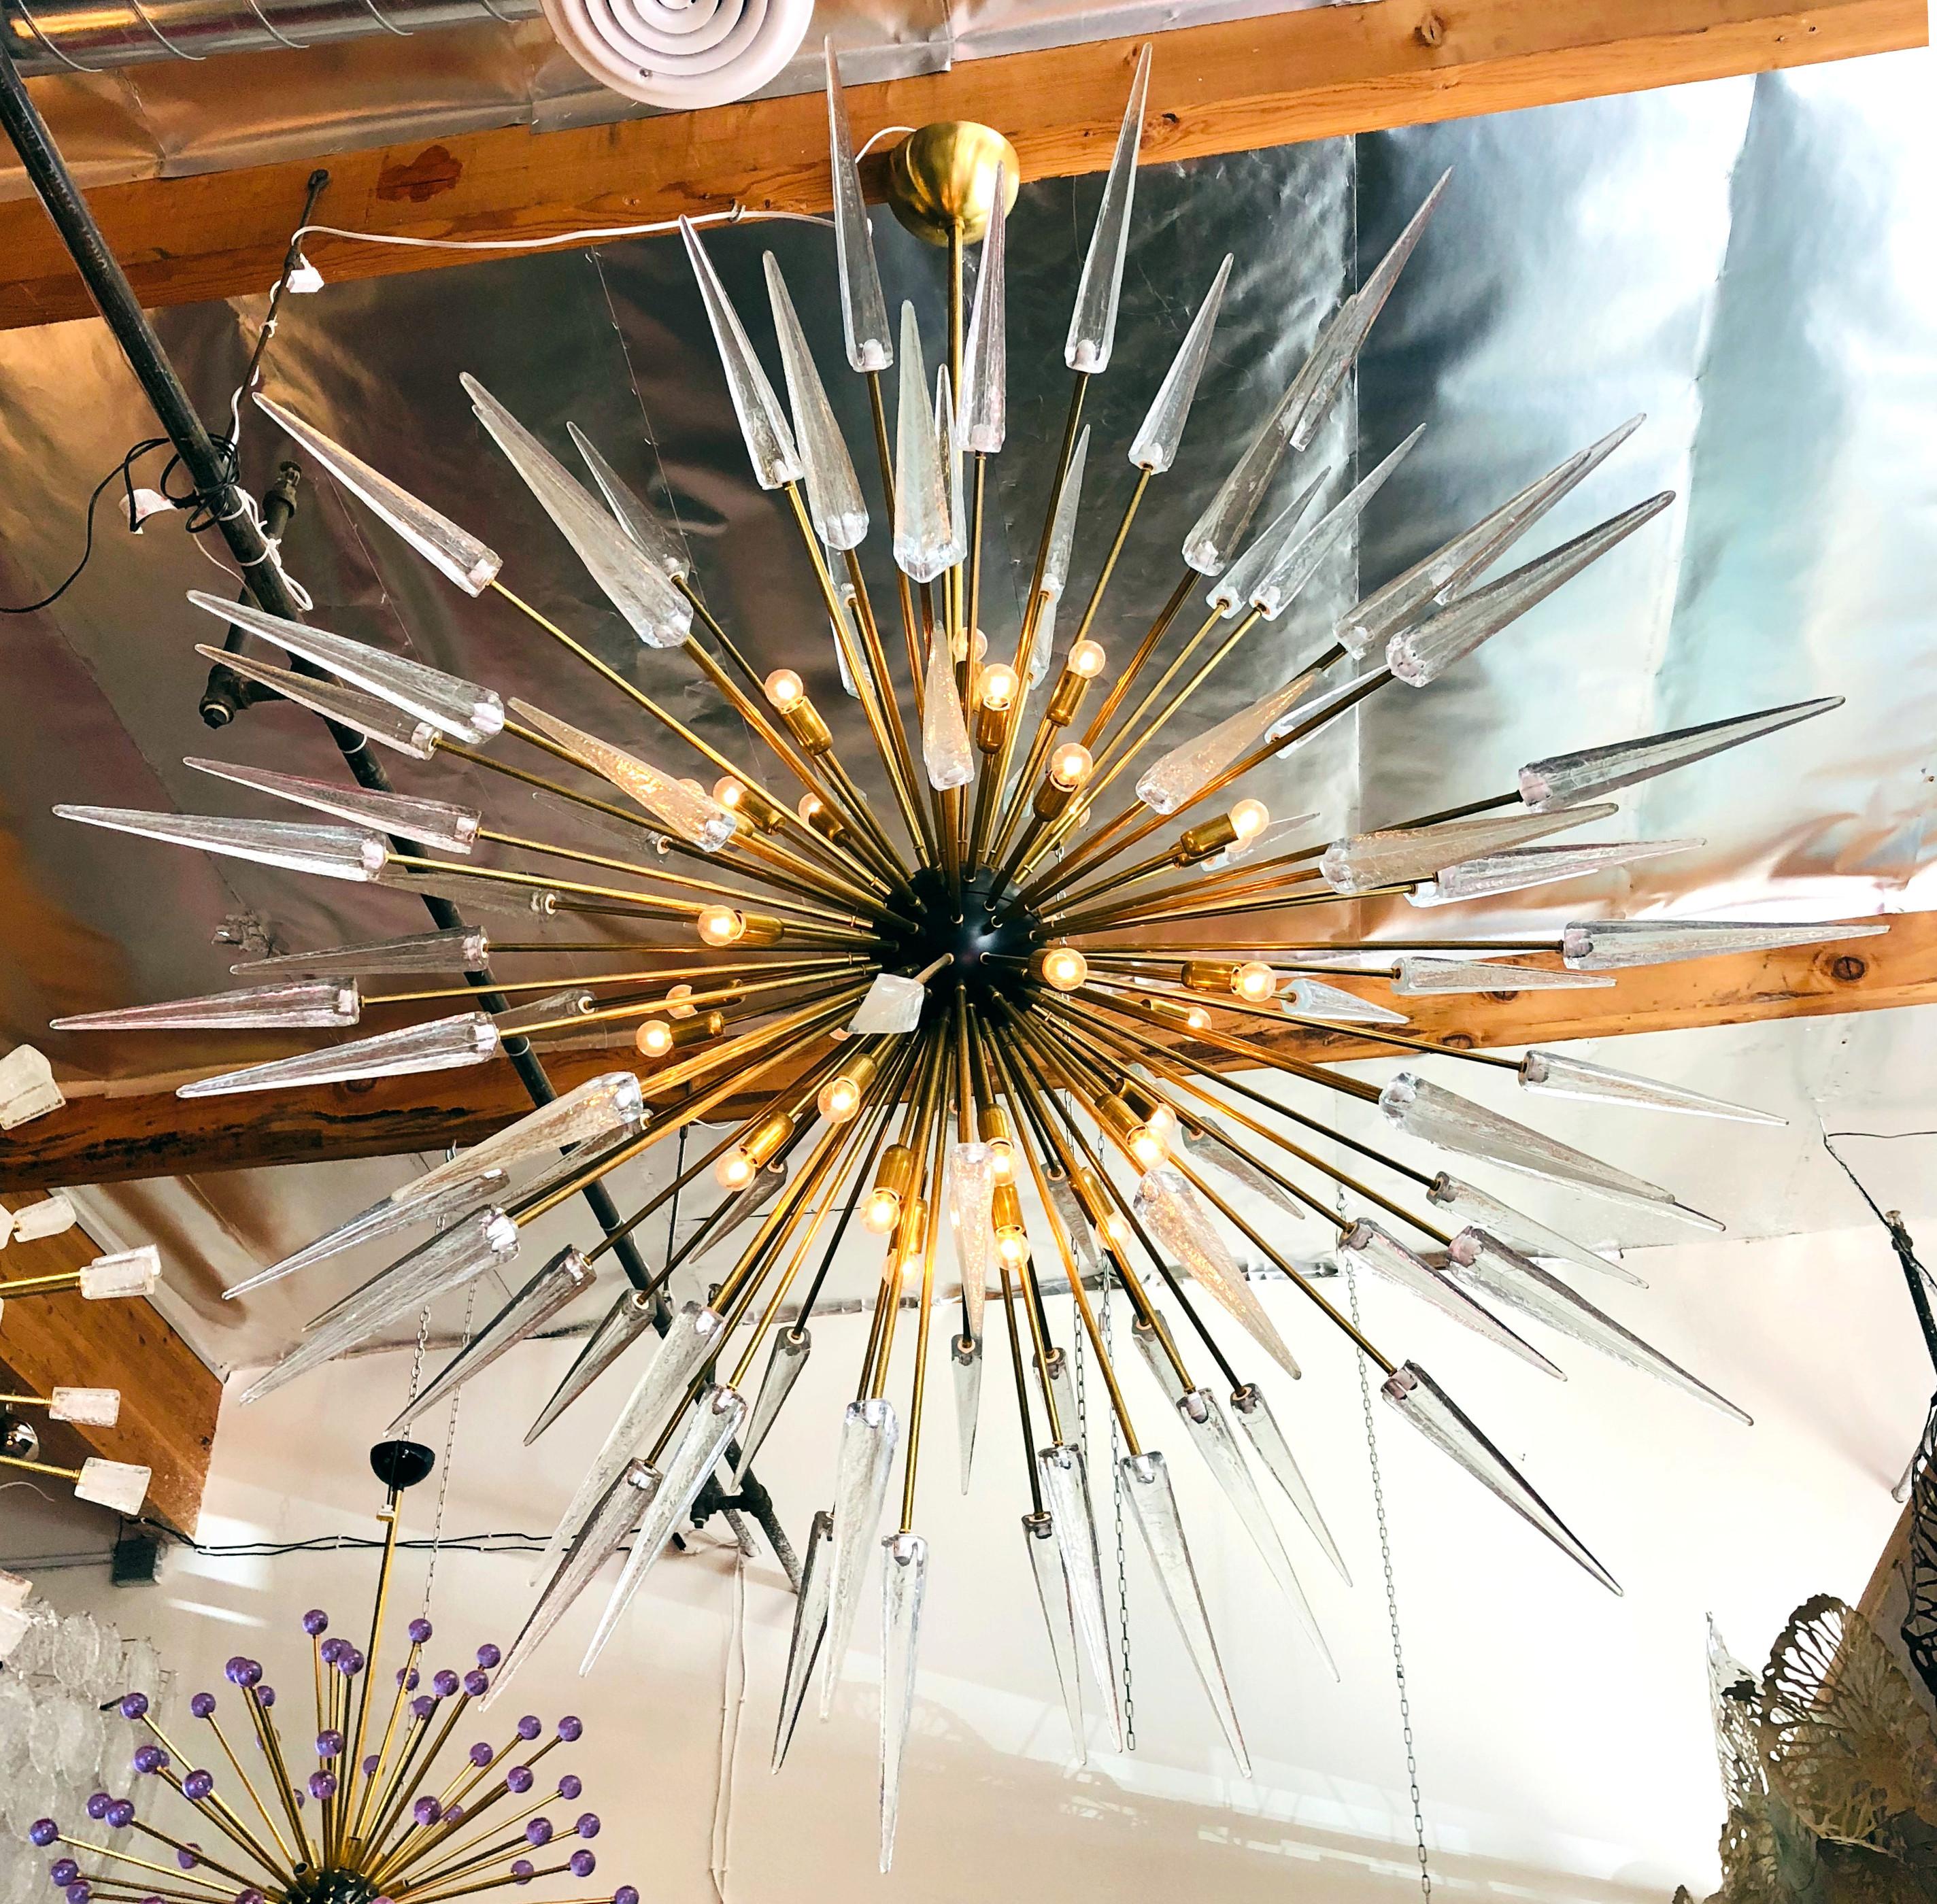 Italian modern sputnik chandelier with clear Murano glass shards spikes, mounted on natural unlacquered brass frame with black enameled centre, designed by Fabio Bergomi for Fabio Ltd / Made in Italy
30 lights / E12 or E14 type / max 40W